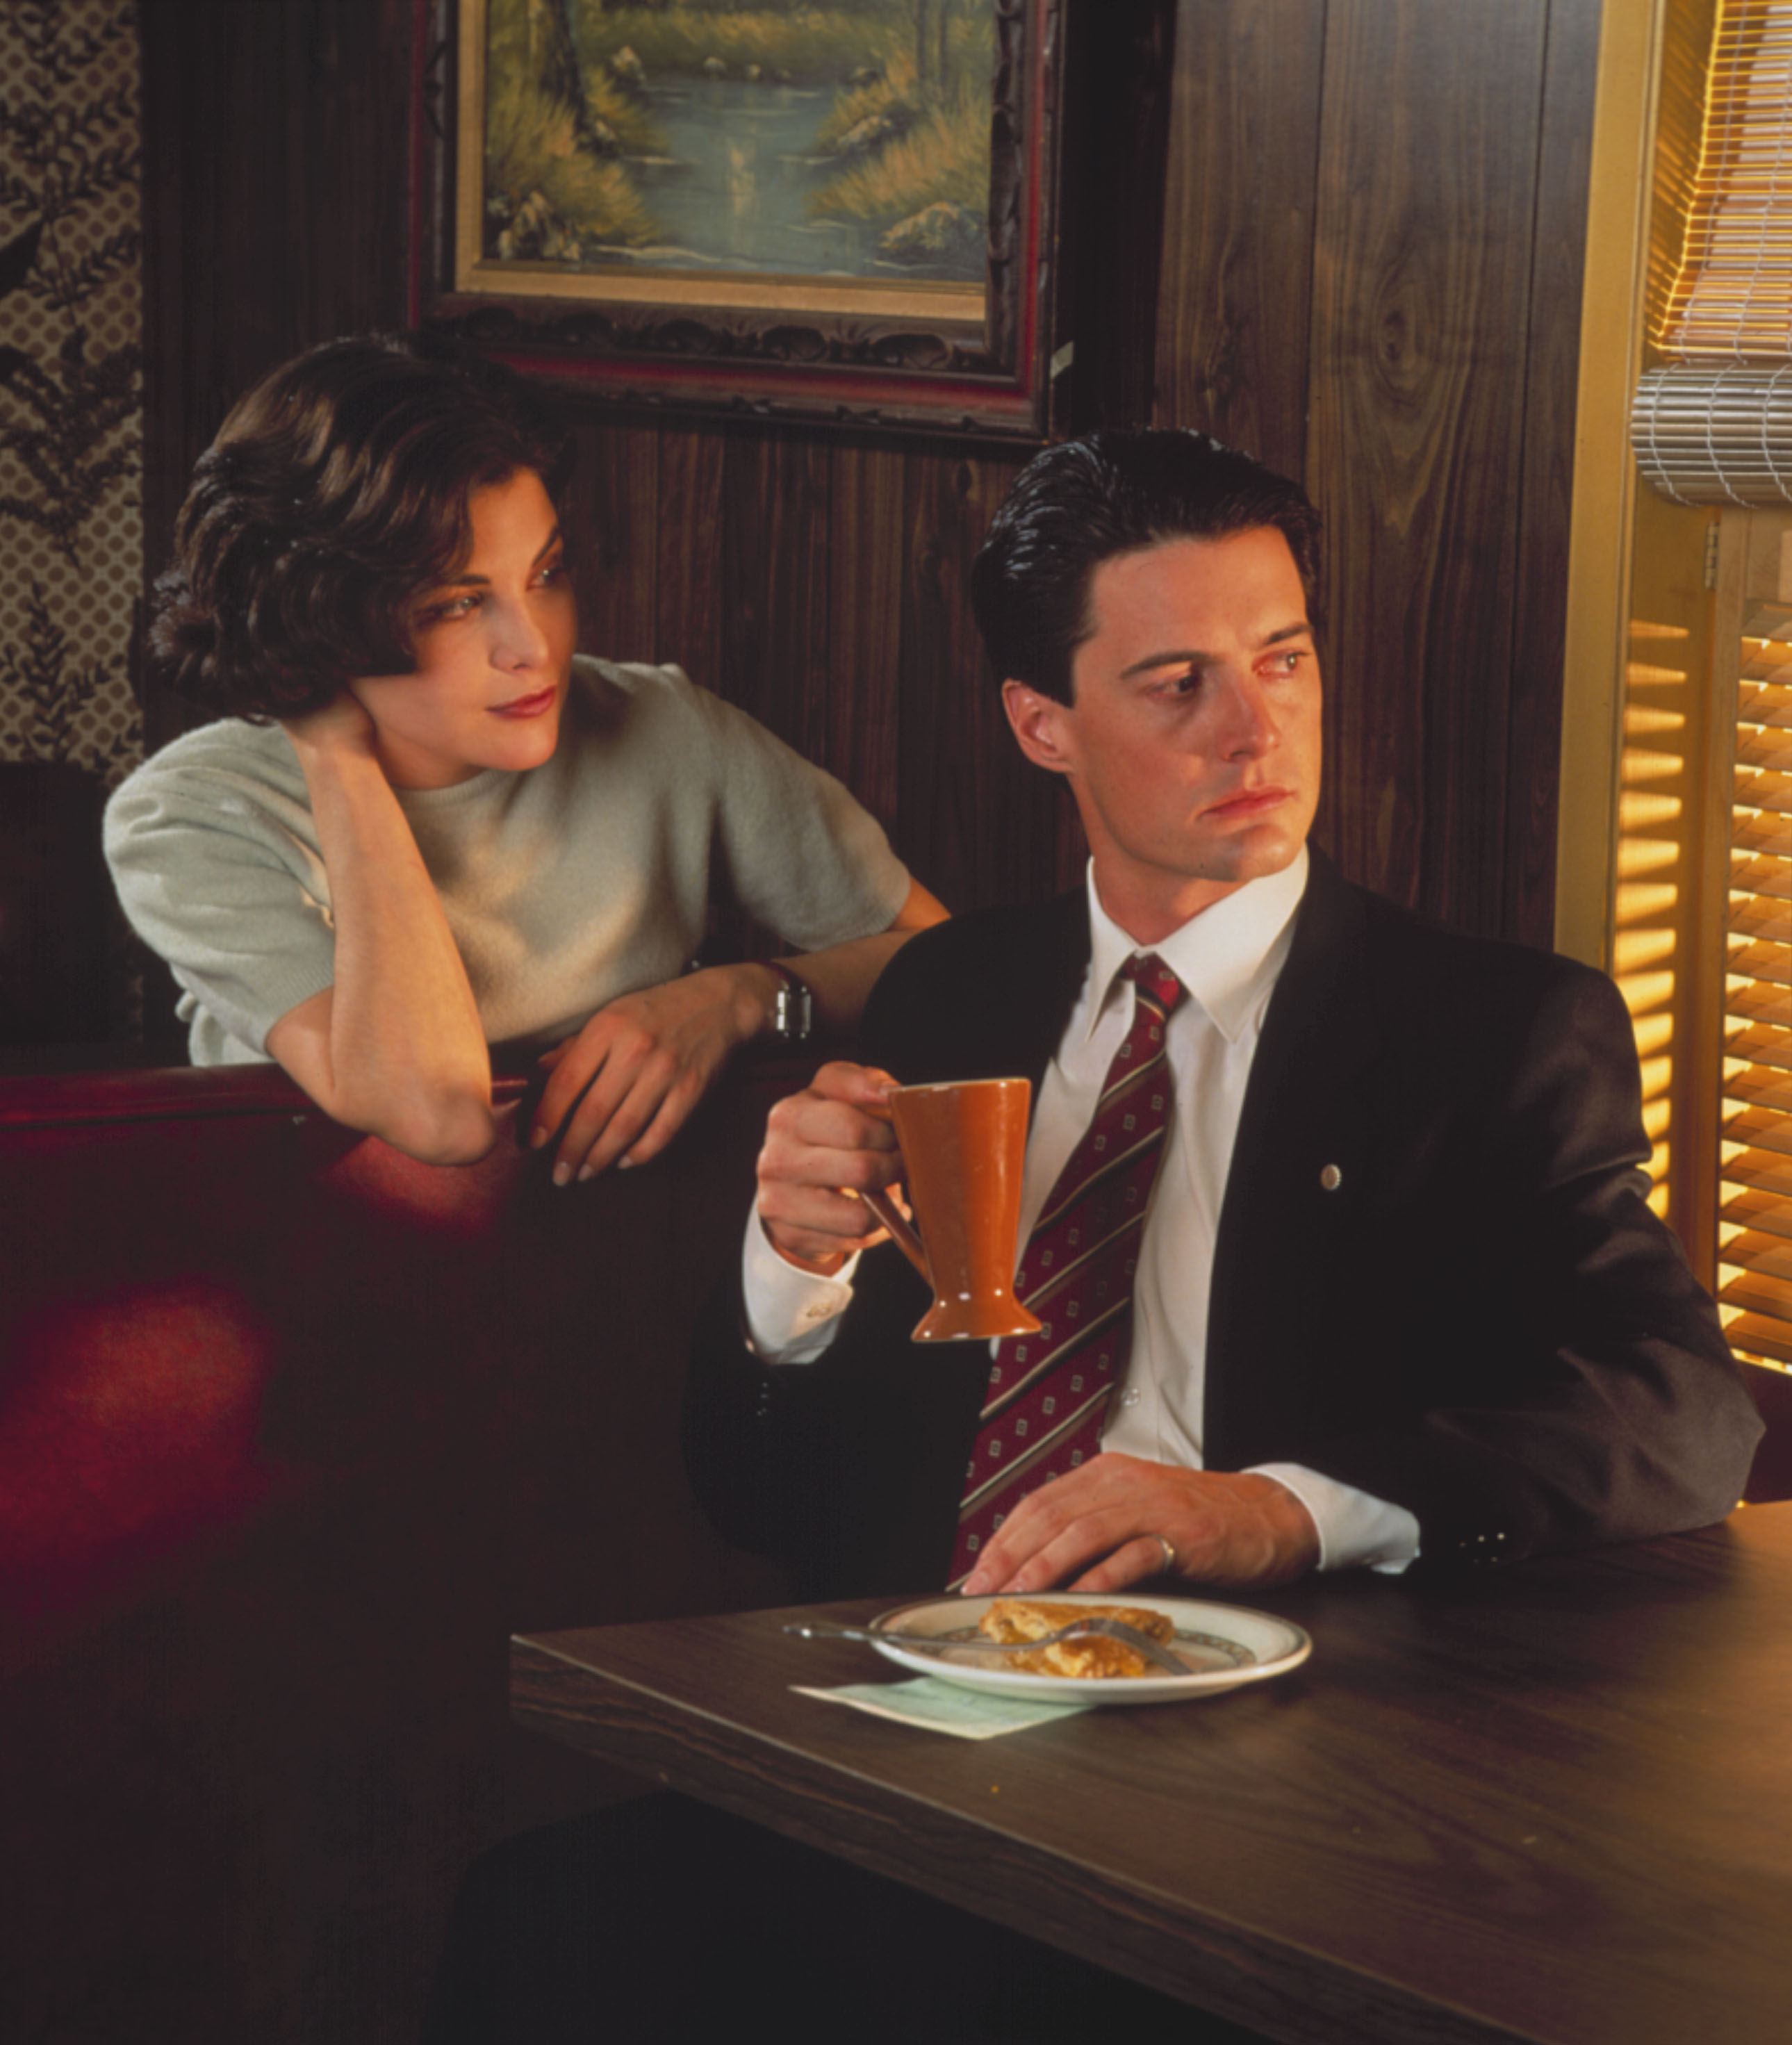 Most recently Lynch directed Twin Peaks: The Return in 2017, a sequel of his mystery drama Twin Peaks which ran for three seasons between 1990 and 1991